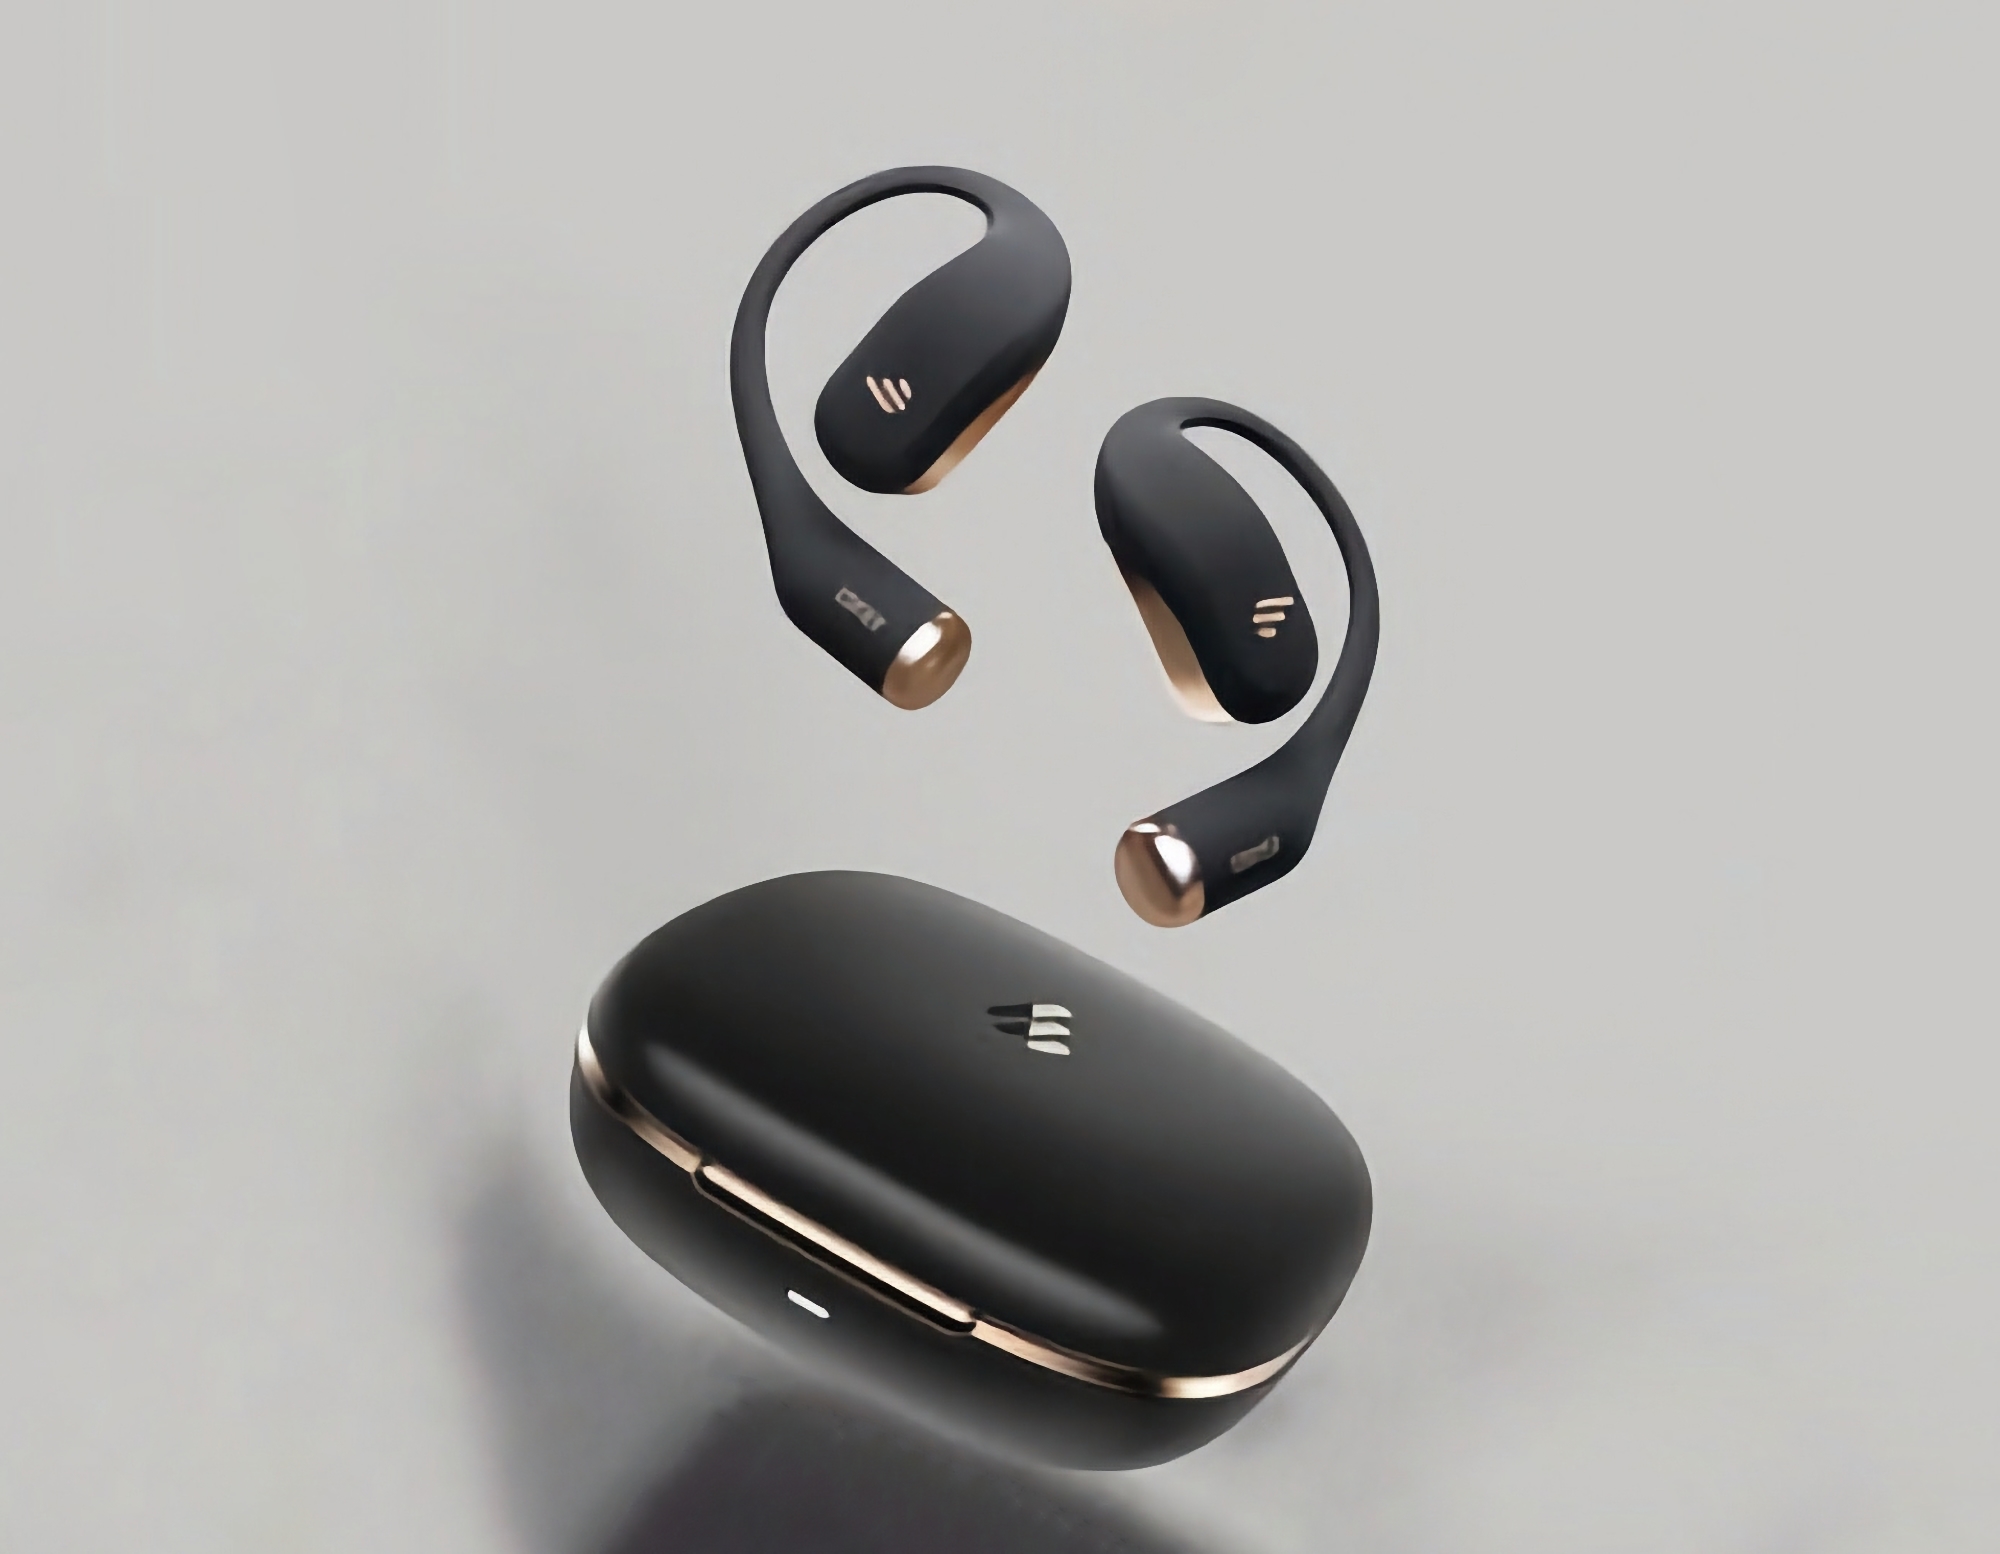 Edifier has unveiled the Comfo Fit Open-ear TWS headphones with ...